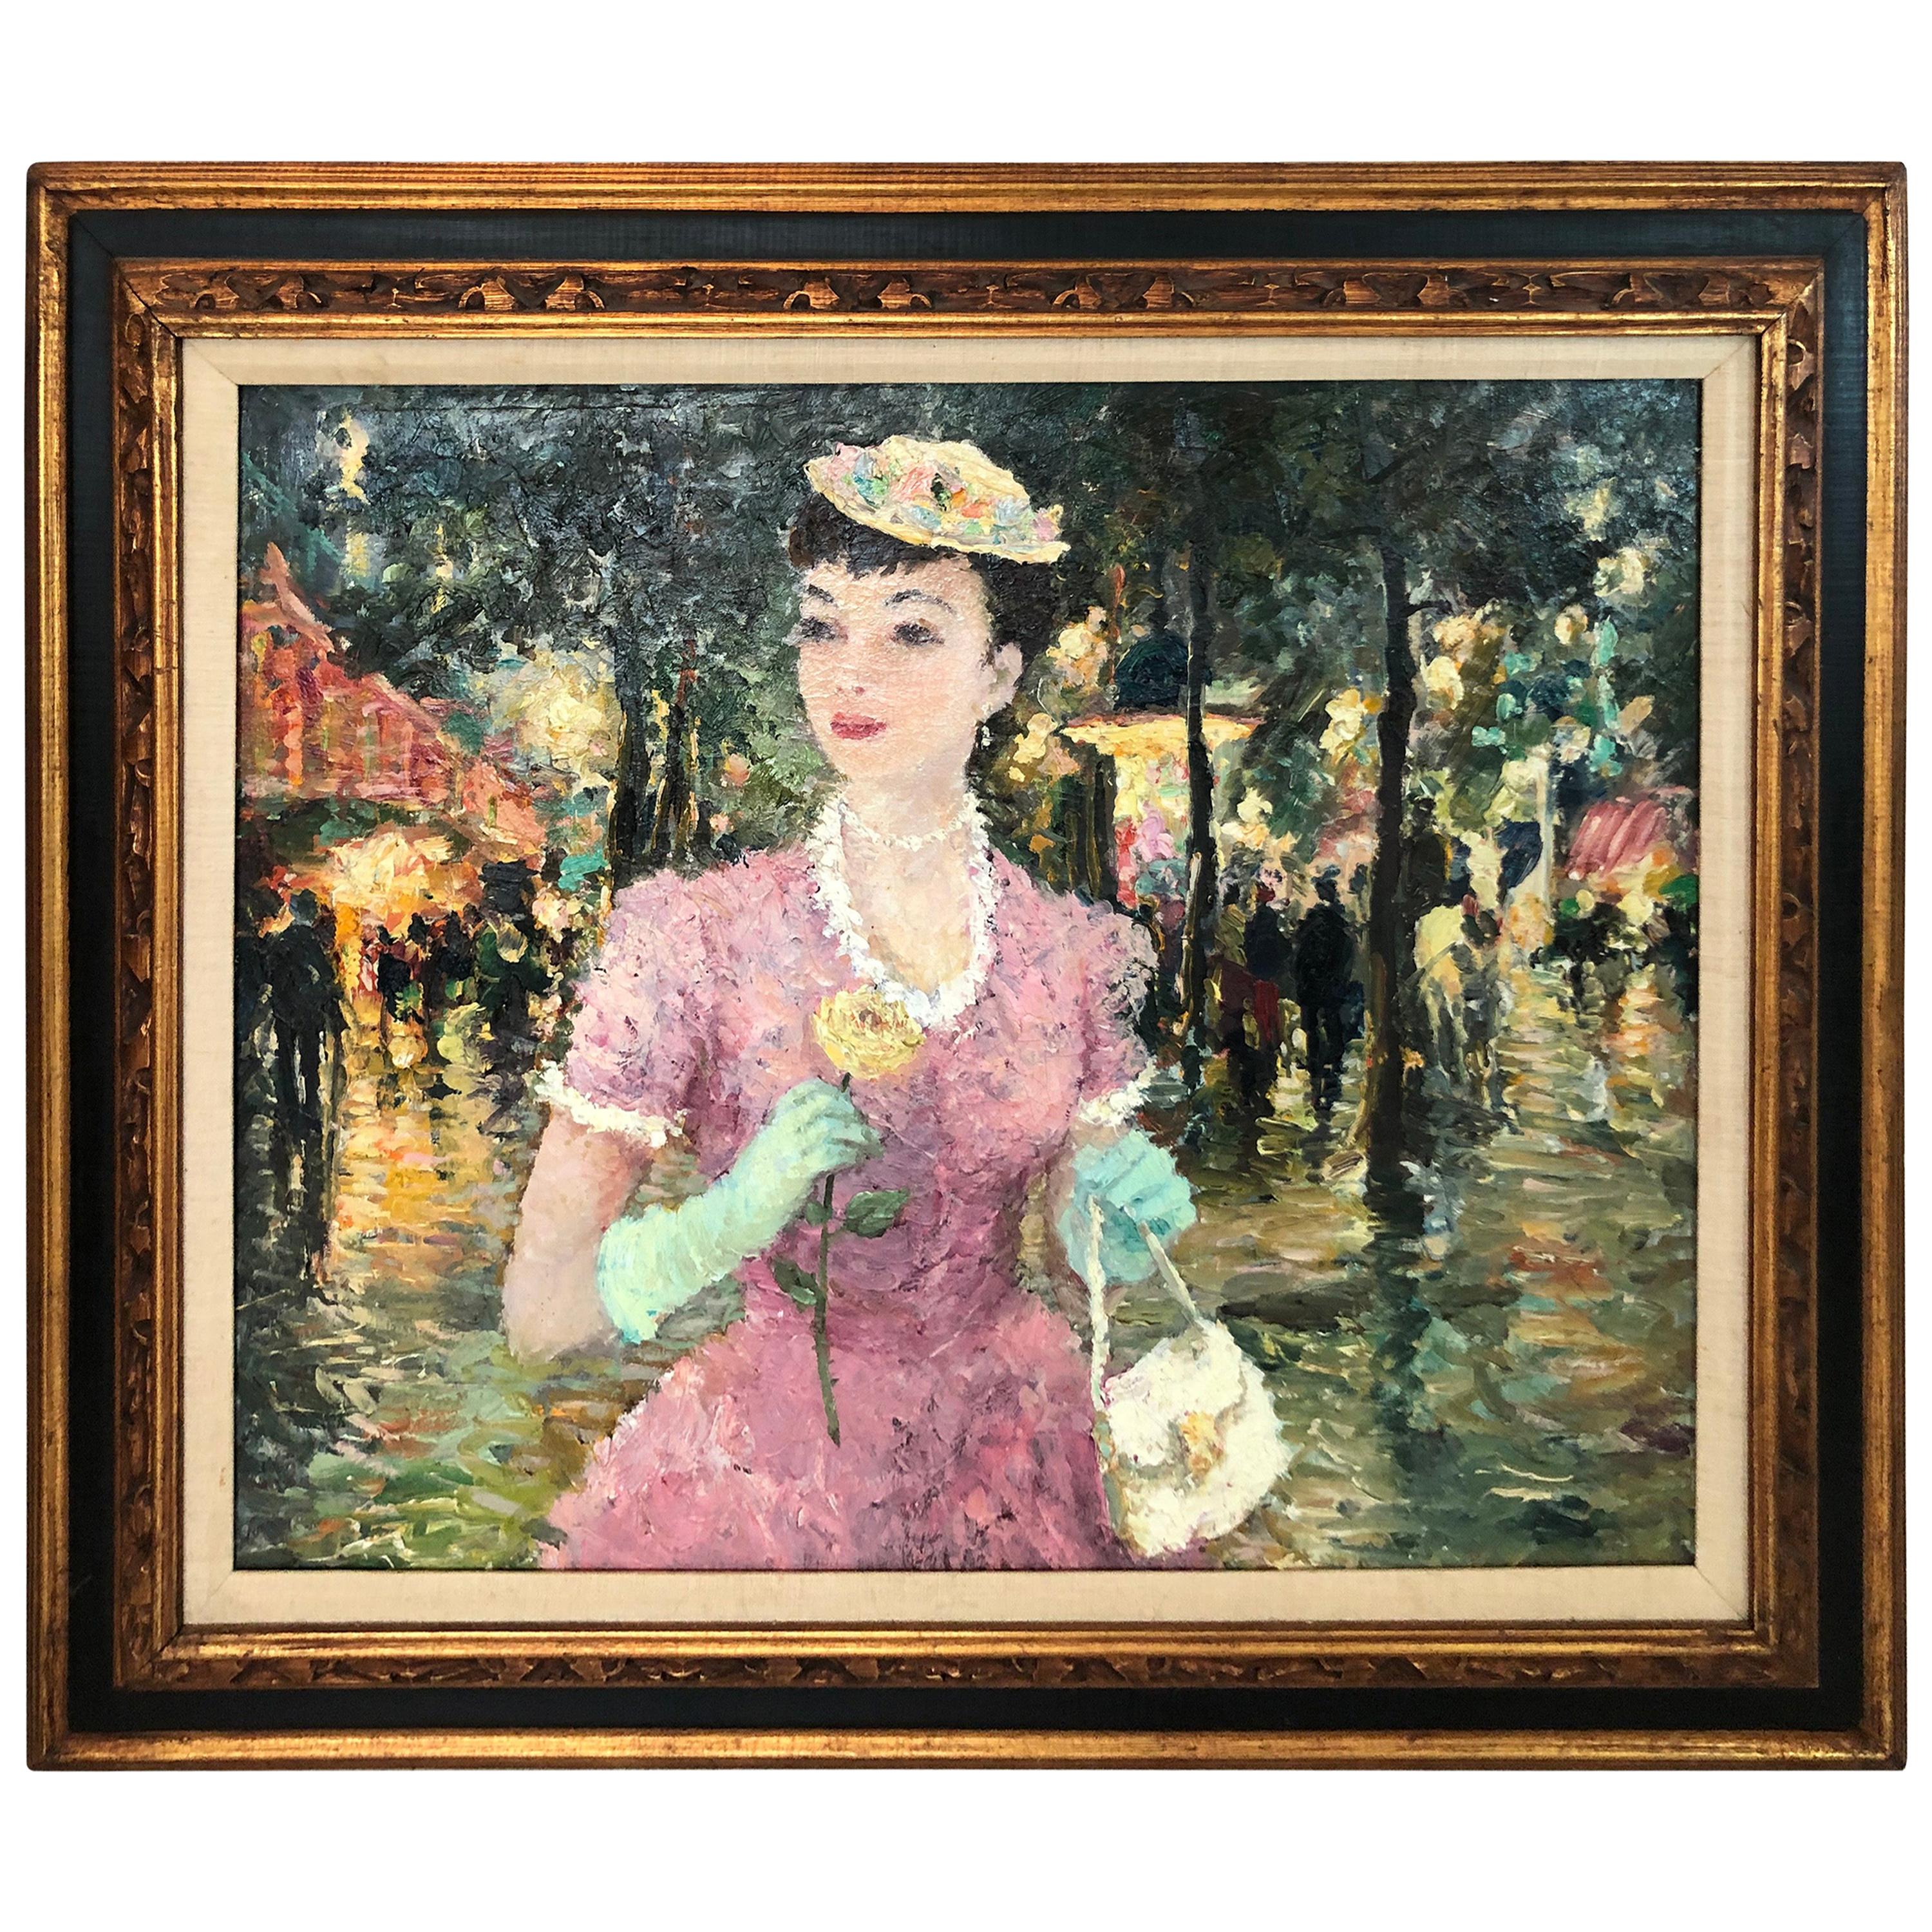 Impasto Impressionist Oil on canvas of a Woman Attributed to Dietz Edzard